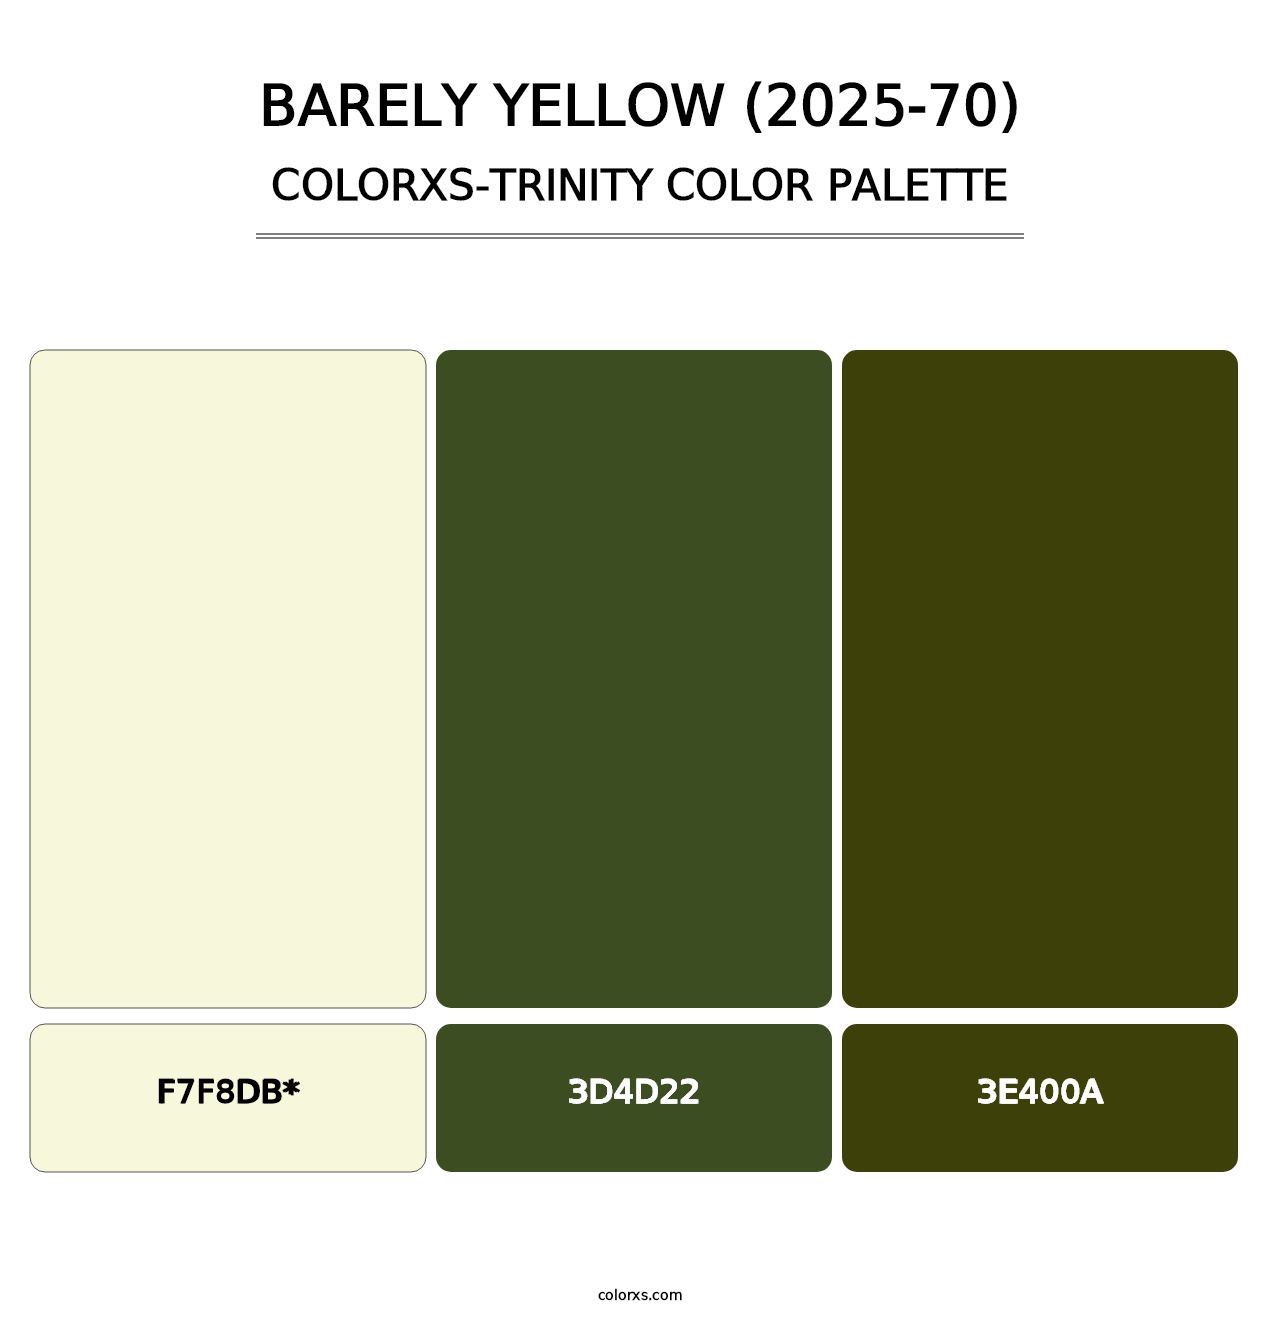 Barely Yellow (2025-70) - Colorxs Trinity Palette